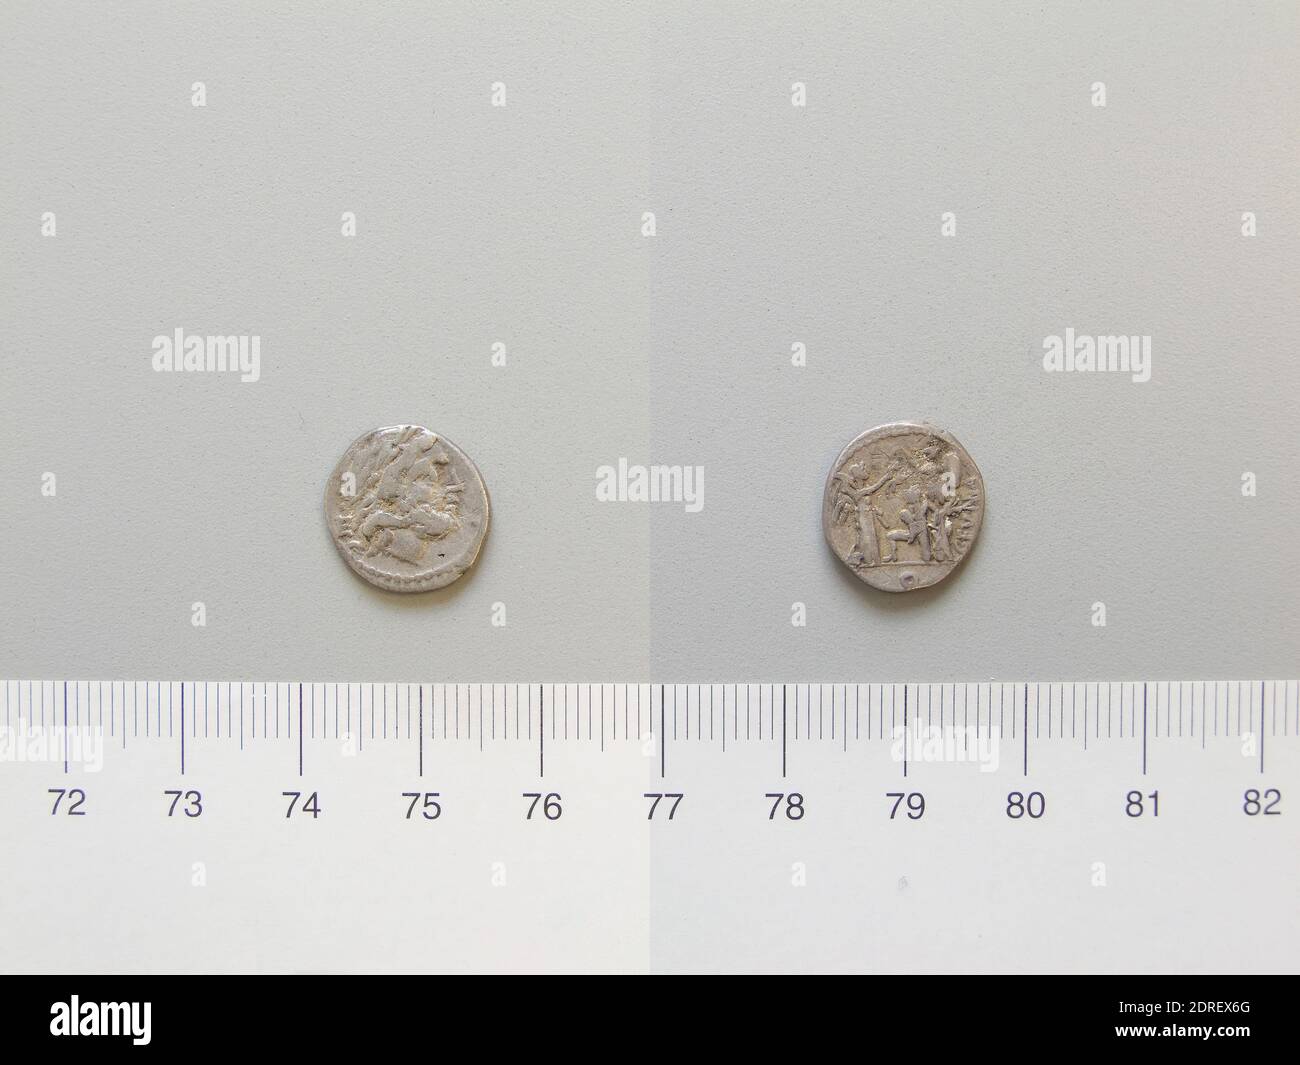 101 a.C., Argento, 1.76 g, 7:00, 14.00 mm, Made in Rome, Italy, Roman, II secolo a.C., Numismatica Foto Stock